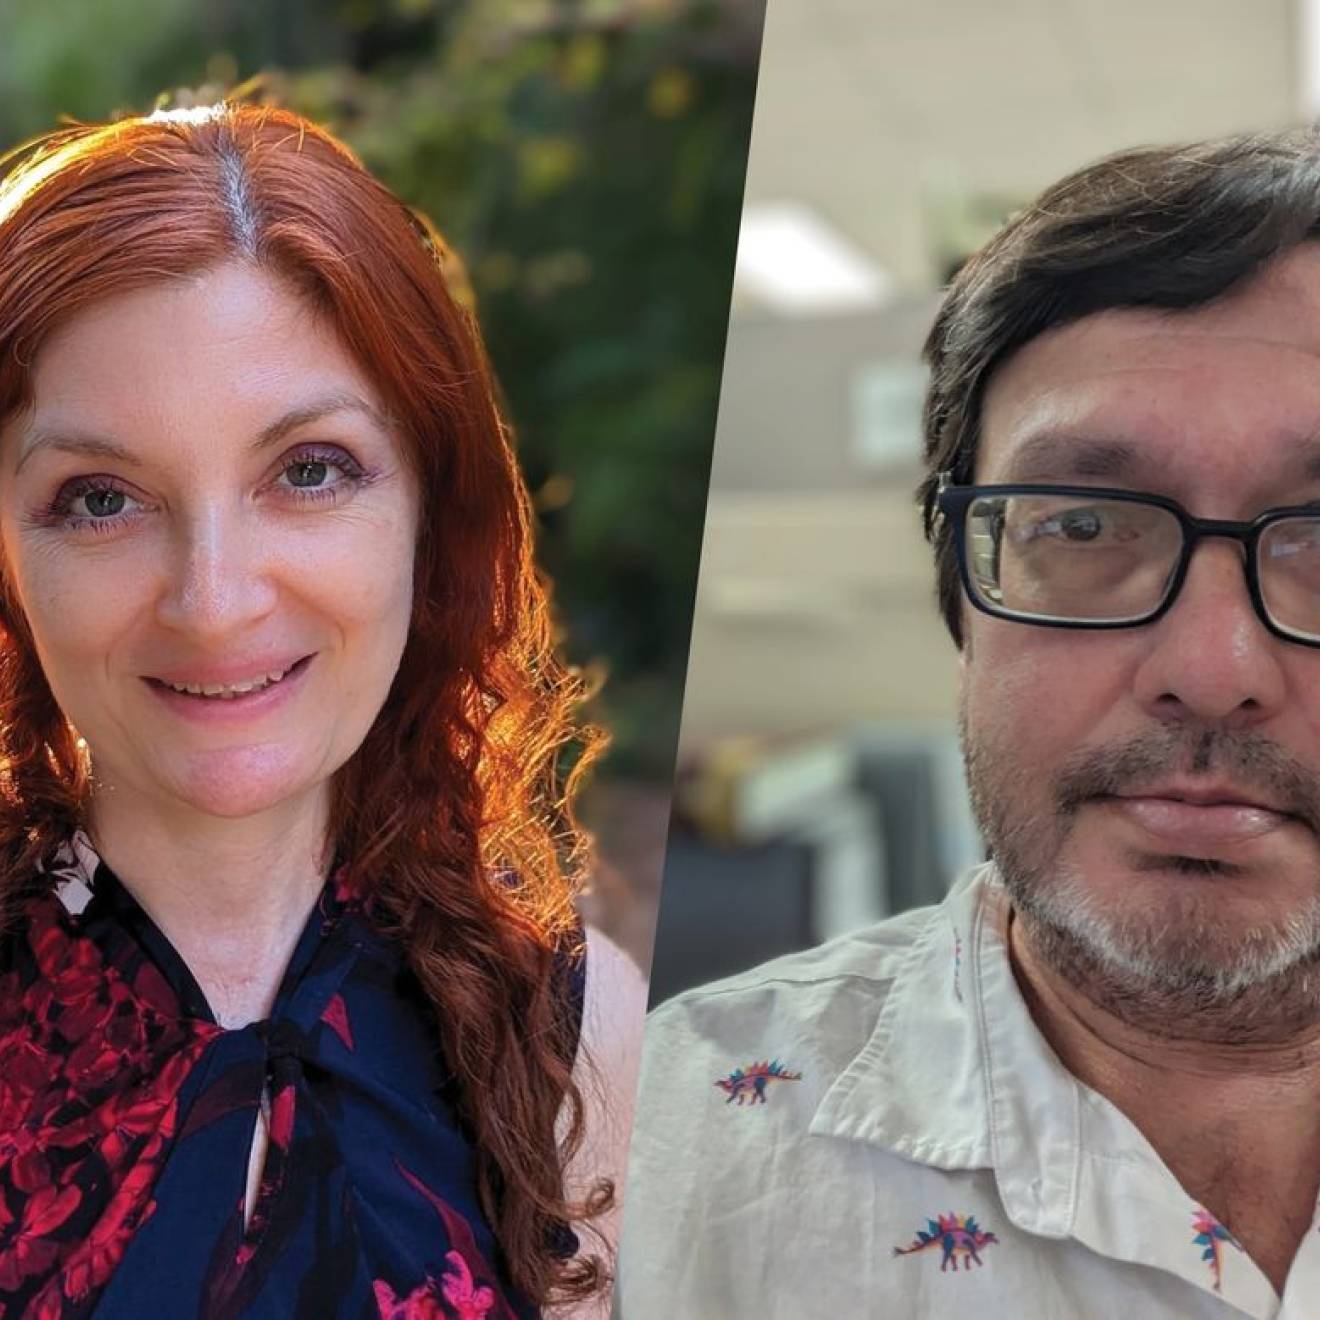 A pale woman with red hair, Smadar Naoz, and a white man with glasses and a goatee, Doug Johnson